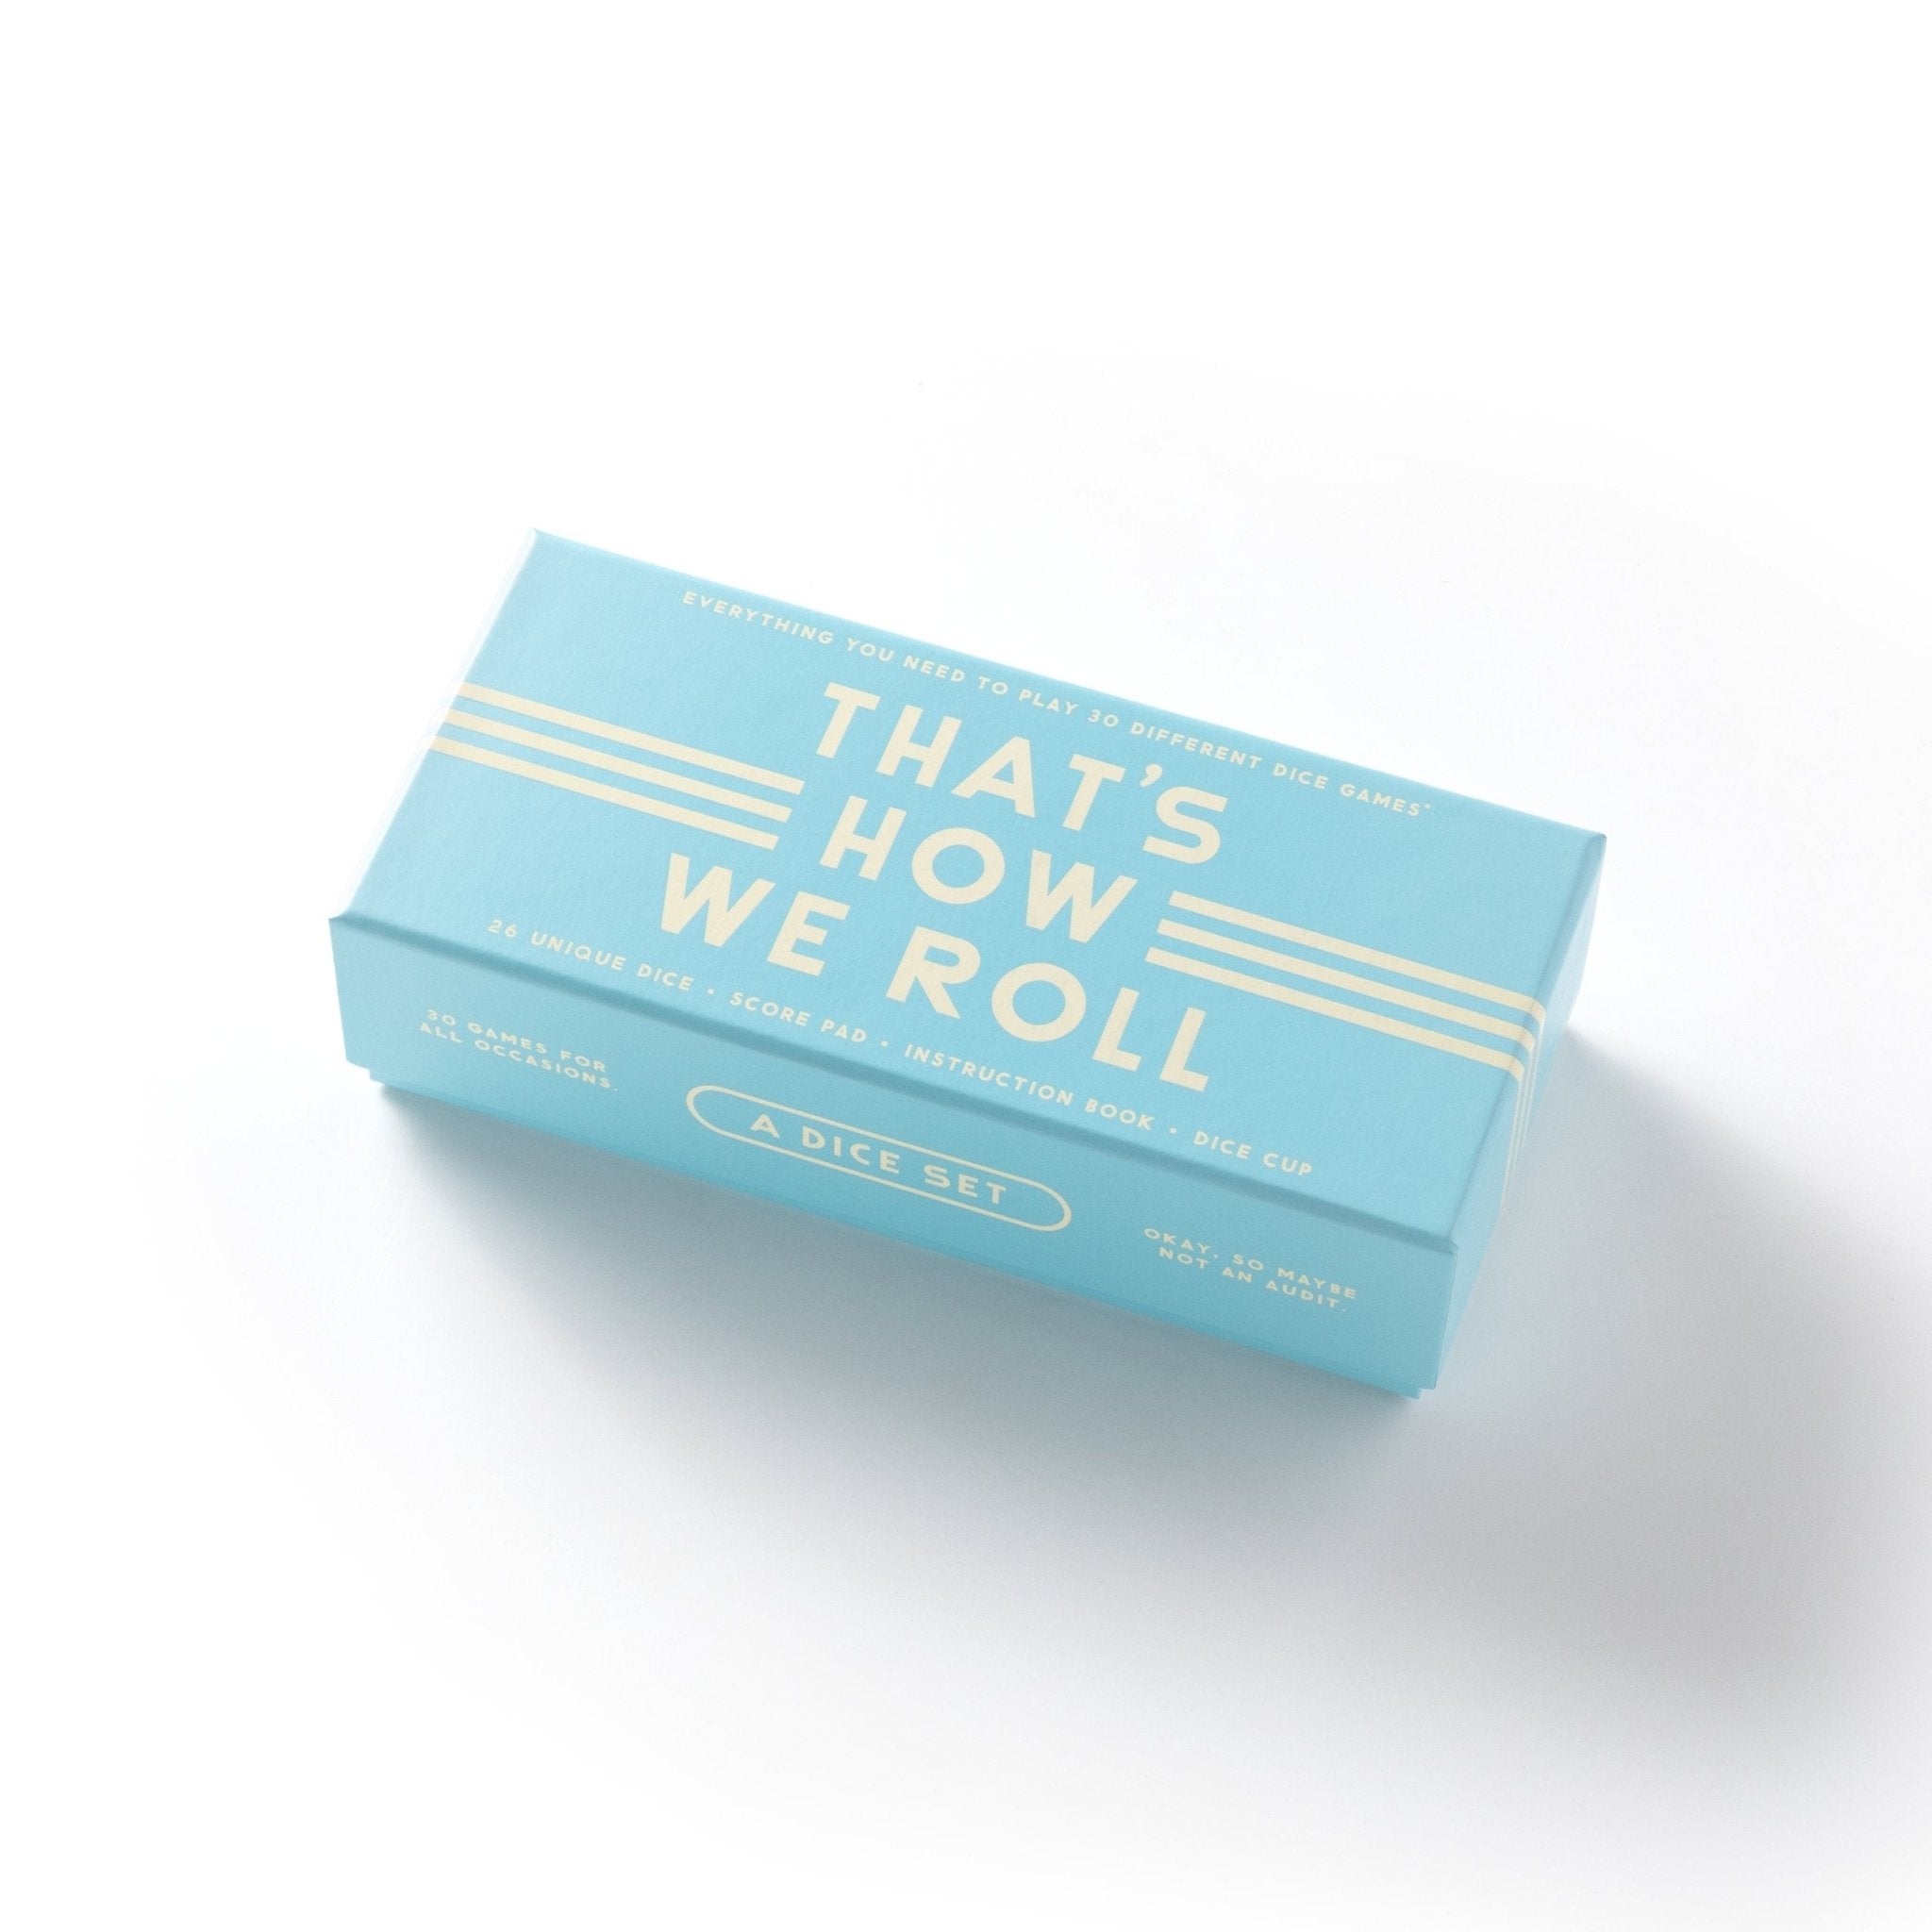 Ligretto Dice — This Is How We Roll